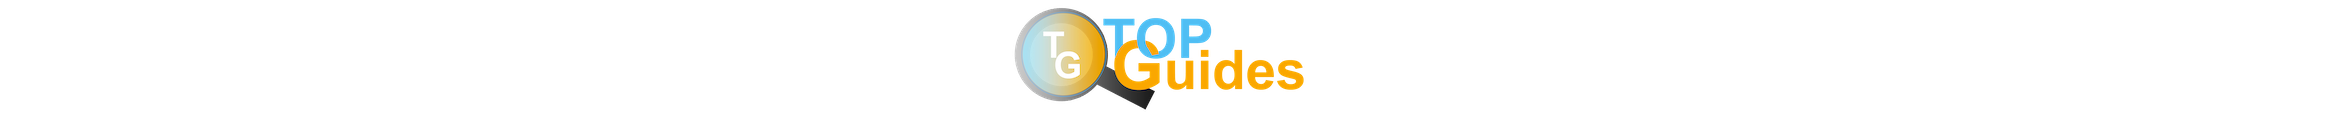 Top-Guides.fr